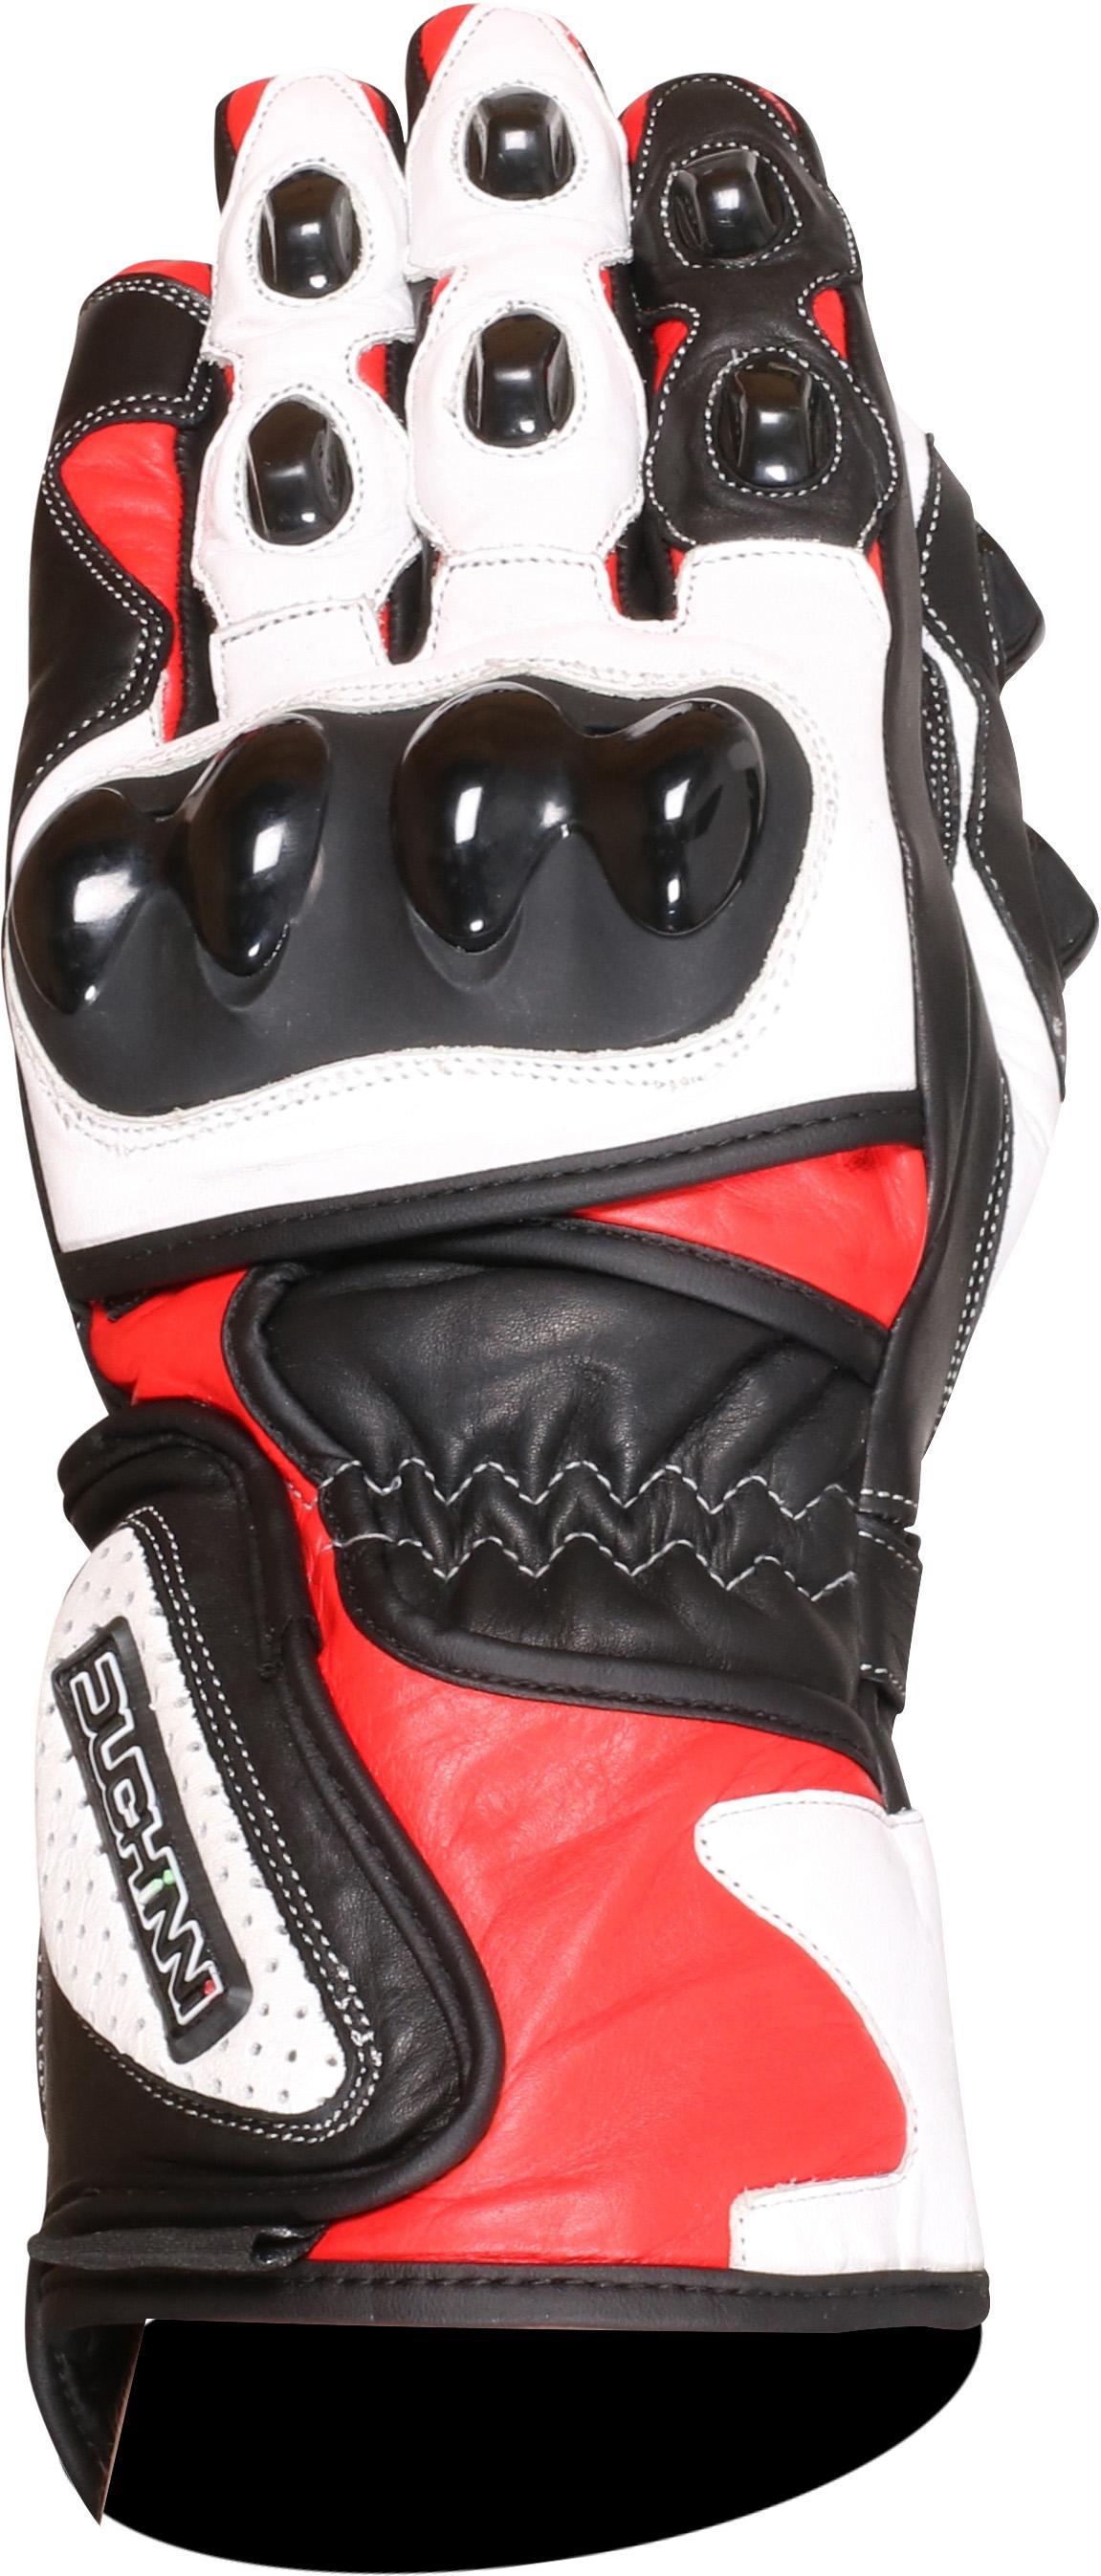 Duchinni Dr1 Motorcycle Gloves - Black And Red, M